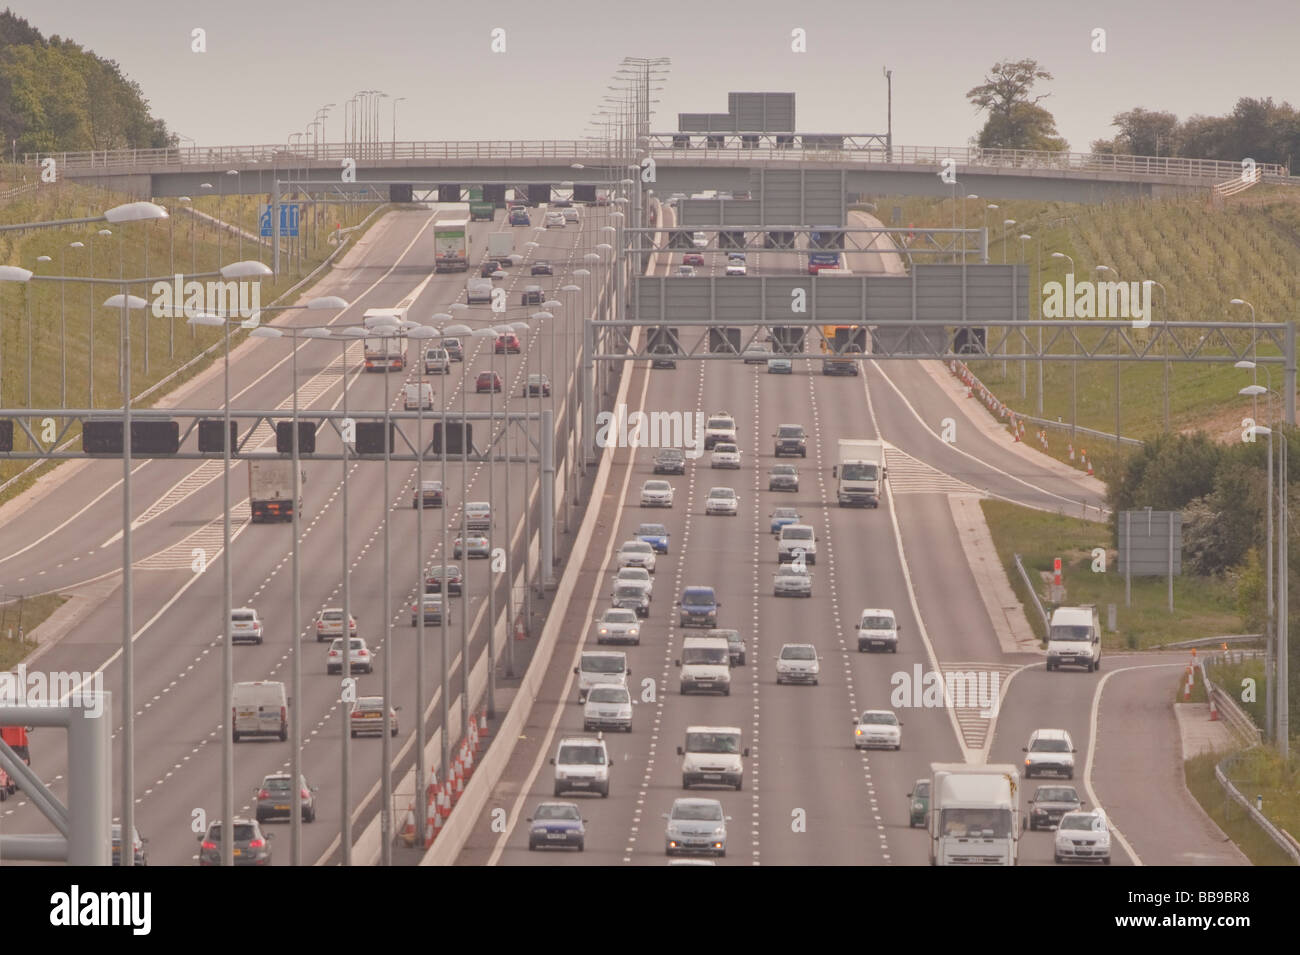 M1 motorway traffic four lanes near J9, sunny day smoggy atmosphere Stock Photo